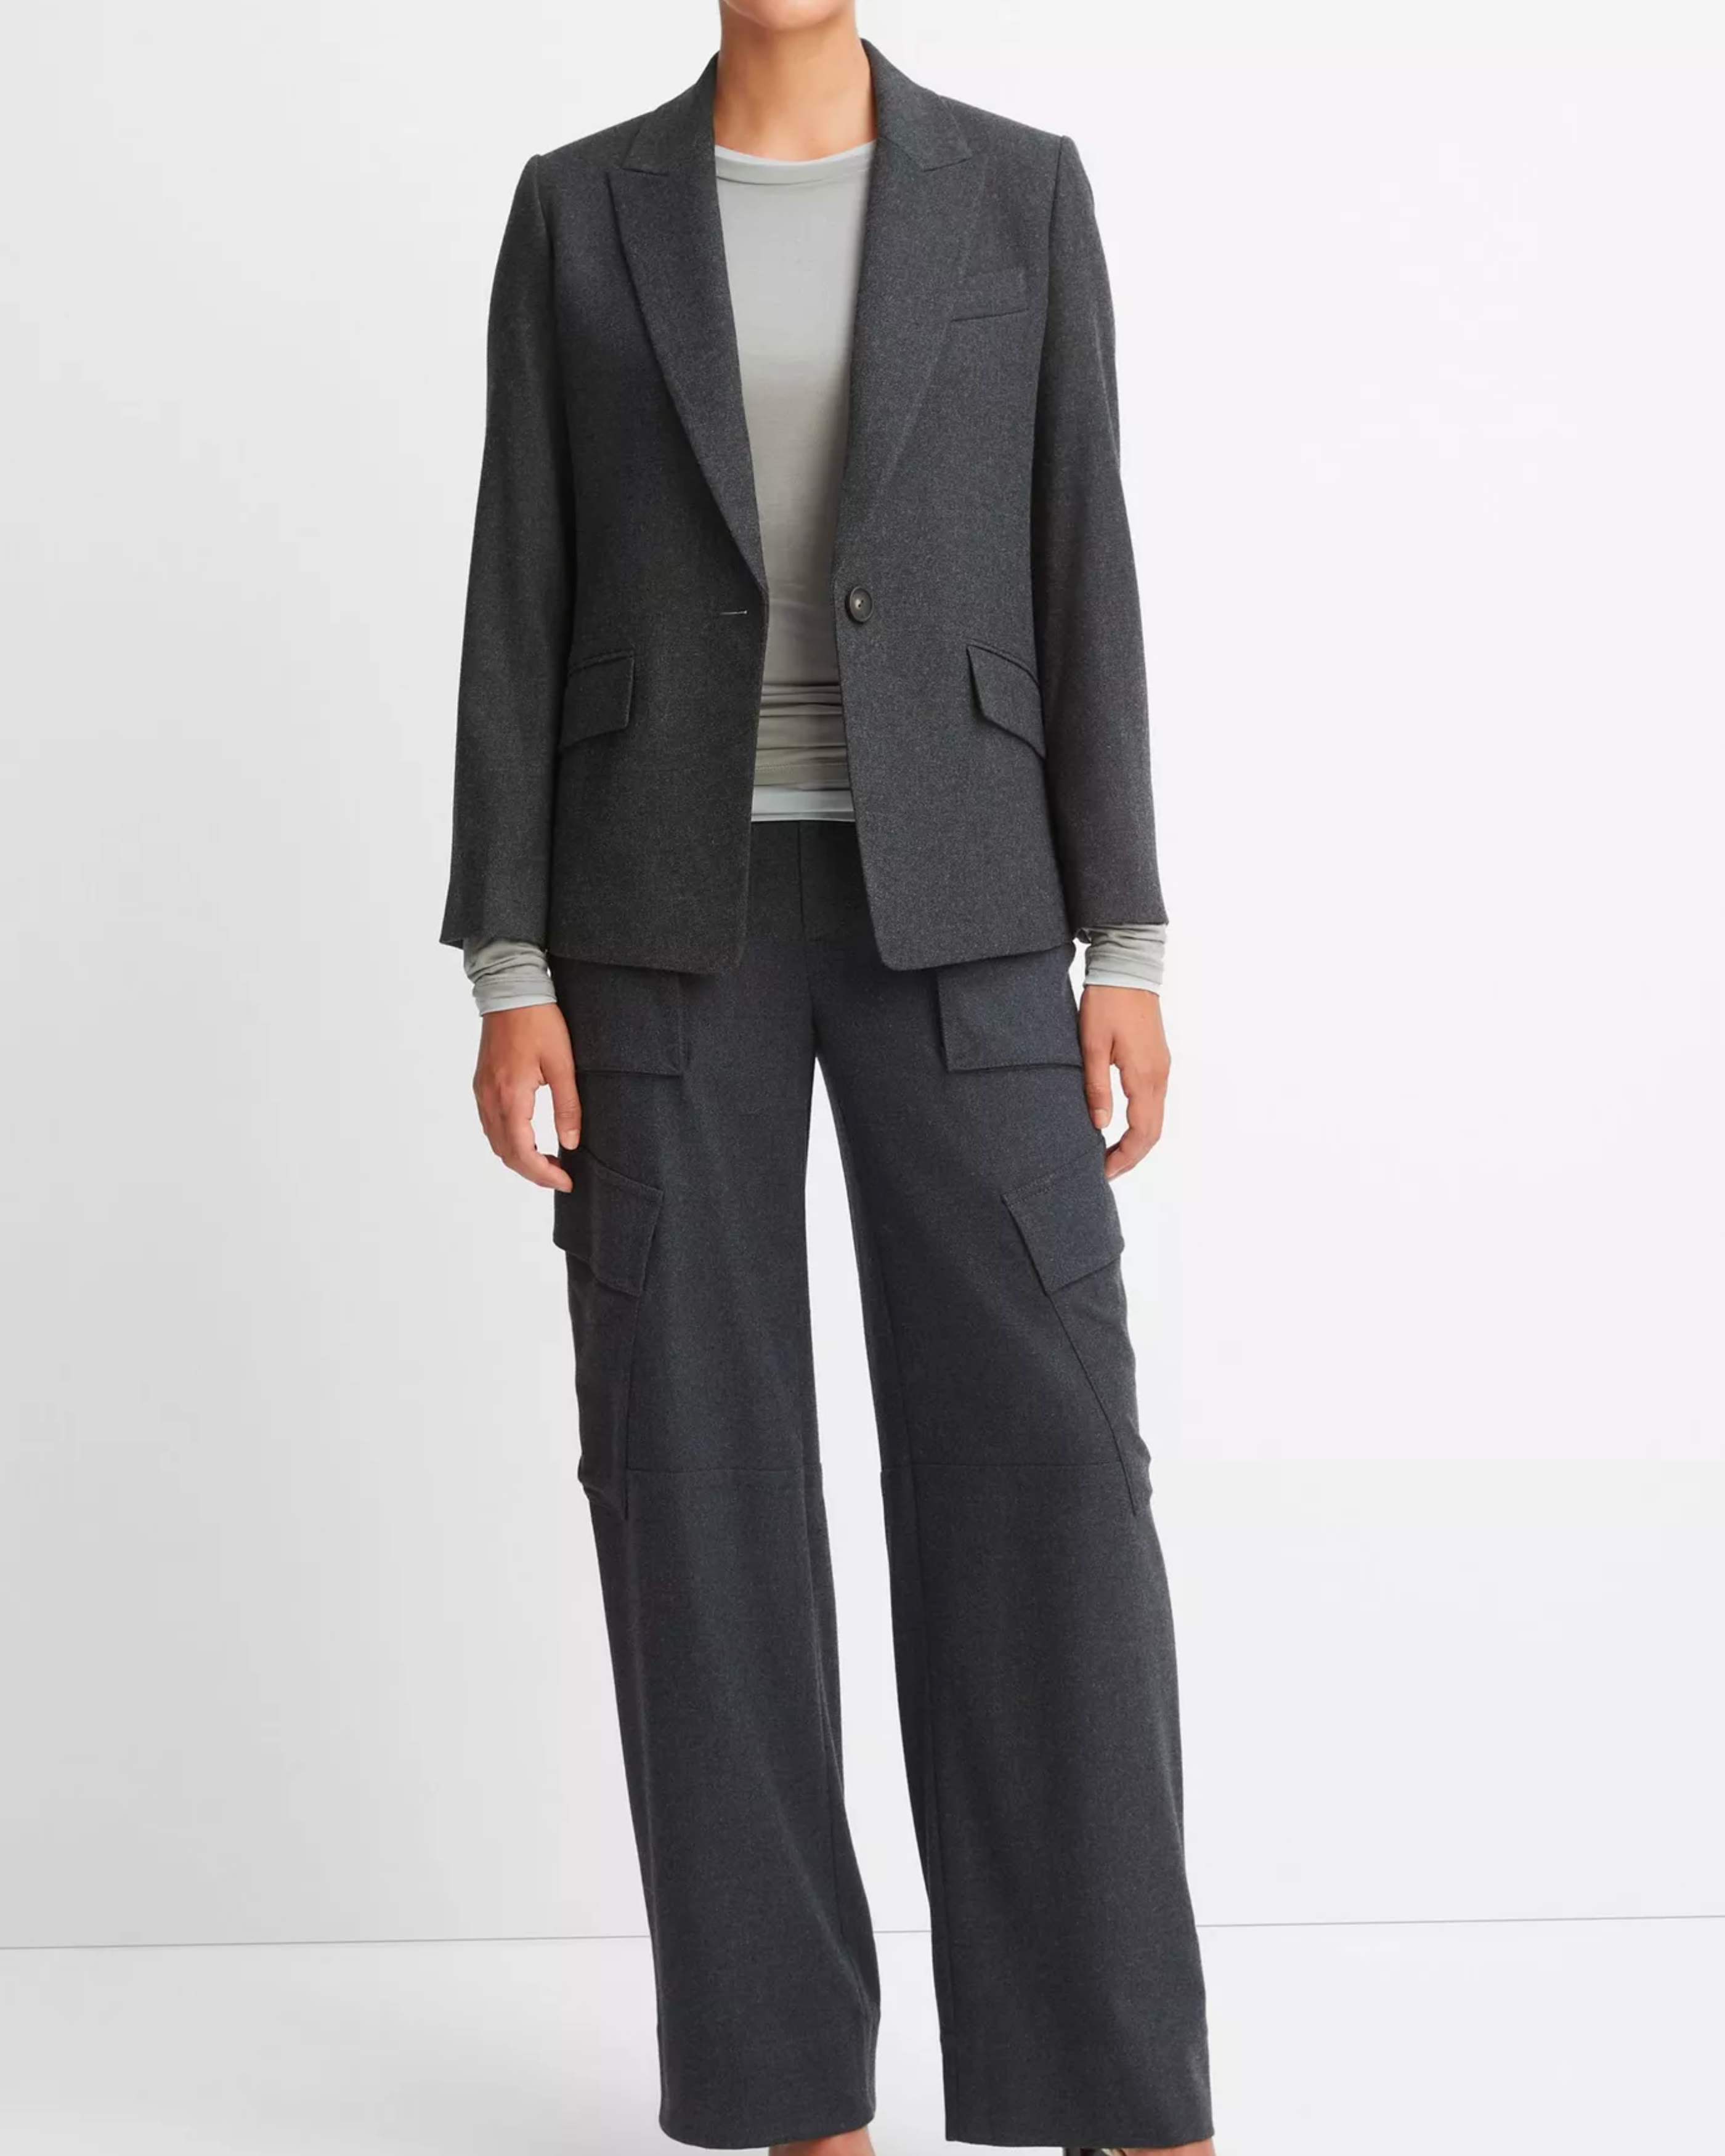 Vince Wool Single Breasted Blazer in Charcoal